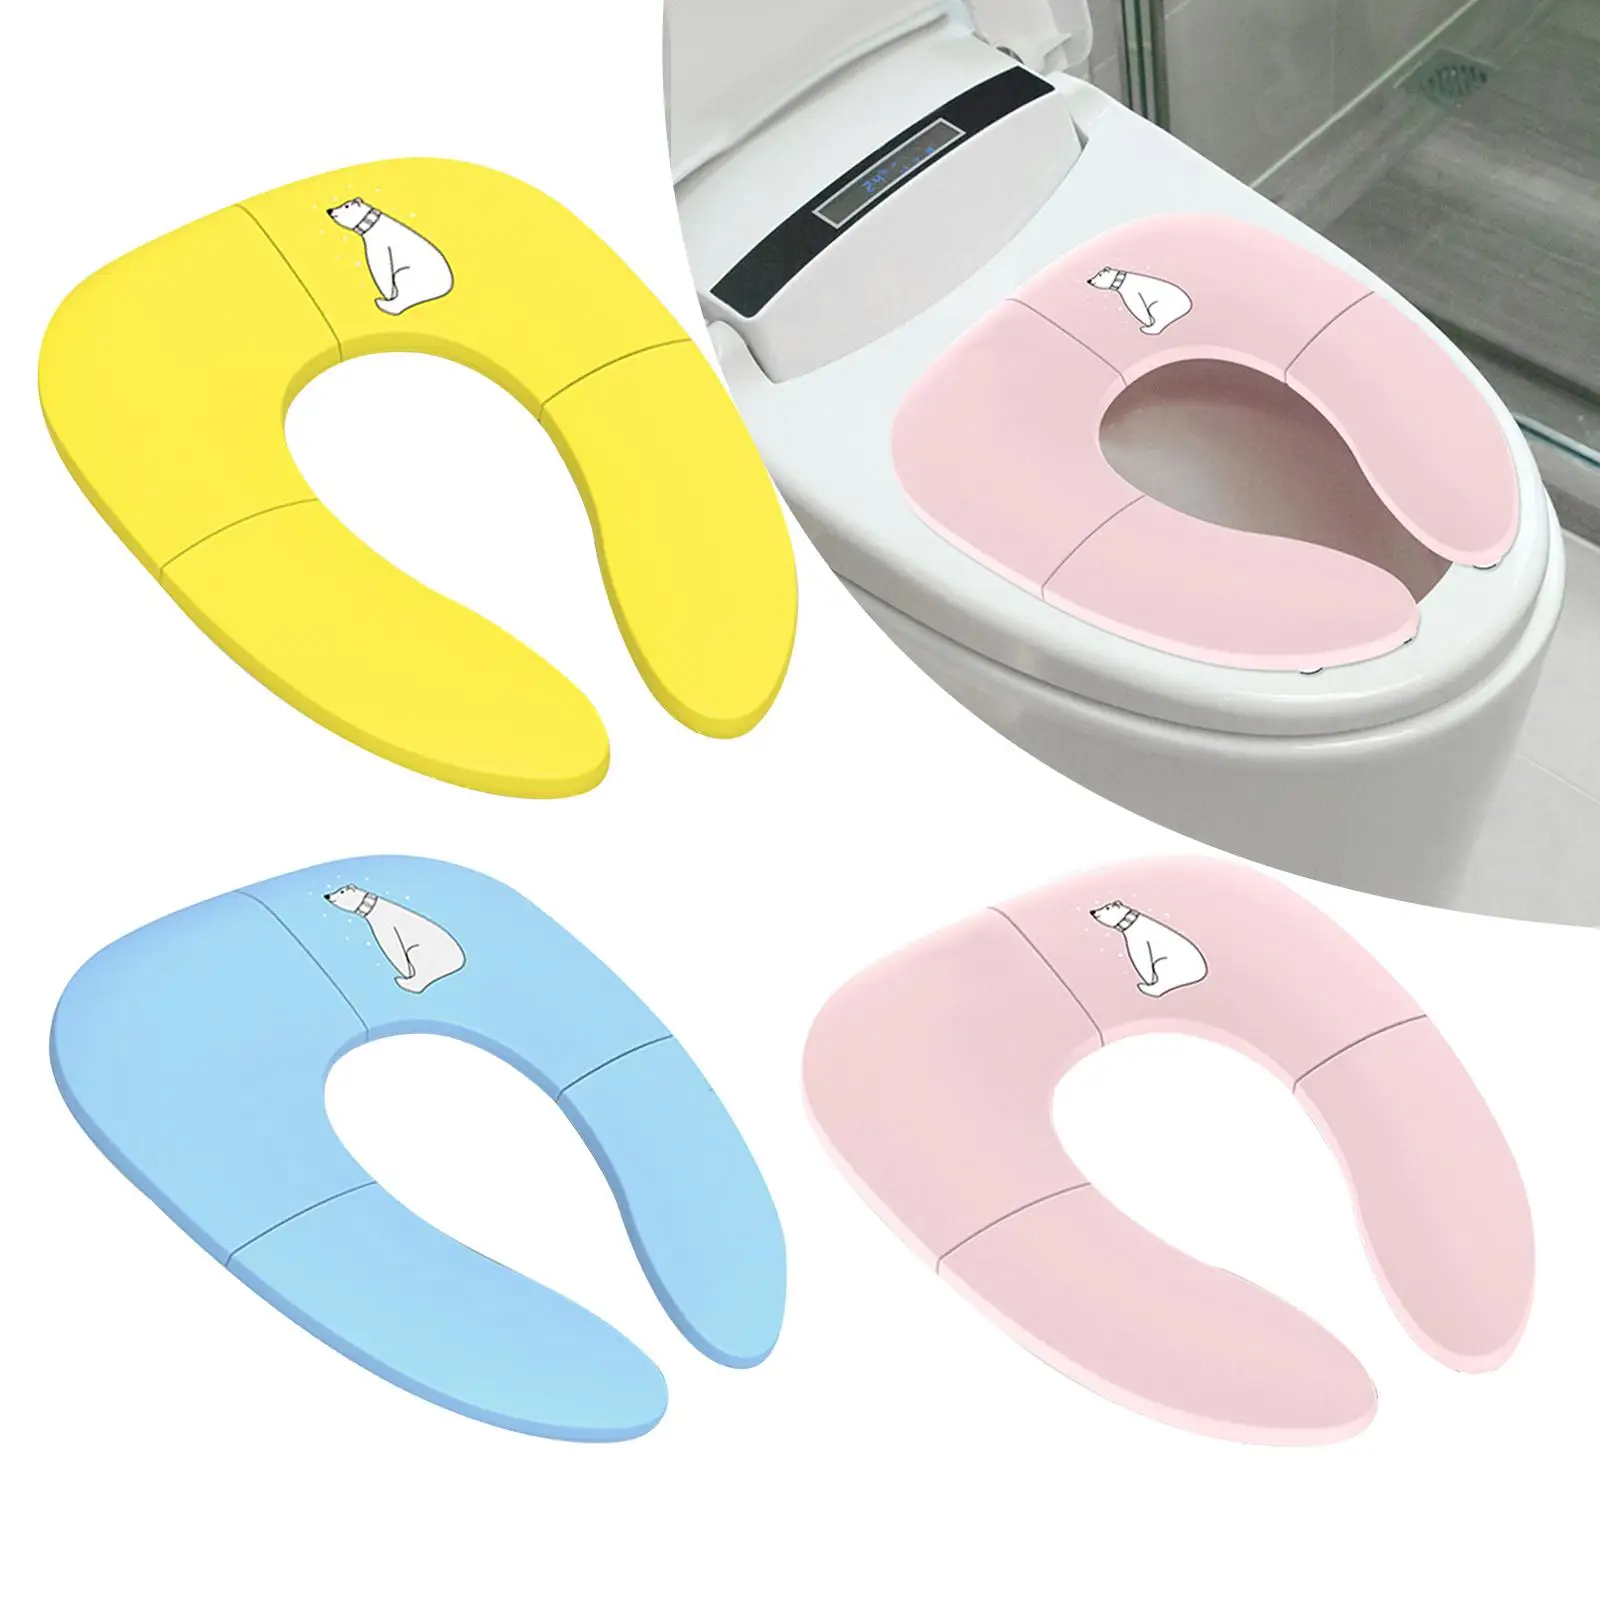 Foldable Toilet Seat pad Upgraded training Seat Portable Non Slip Toilet Cushion for Home Use Girls Kids Boys Baby